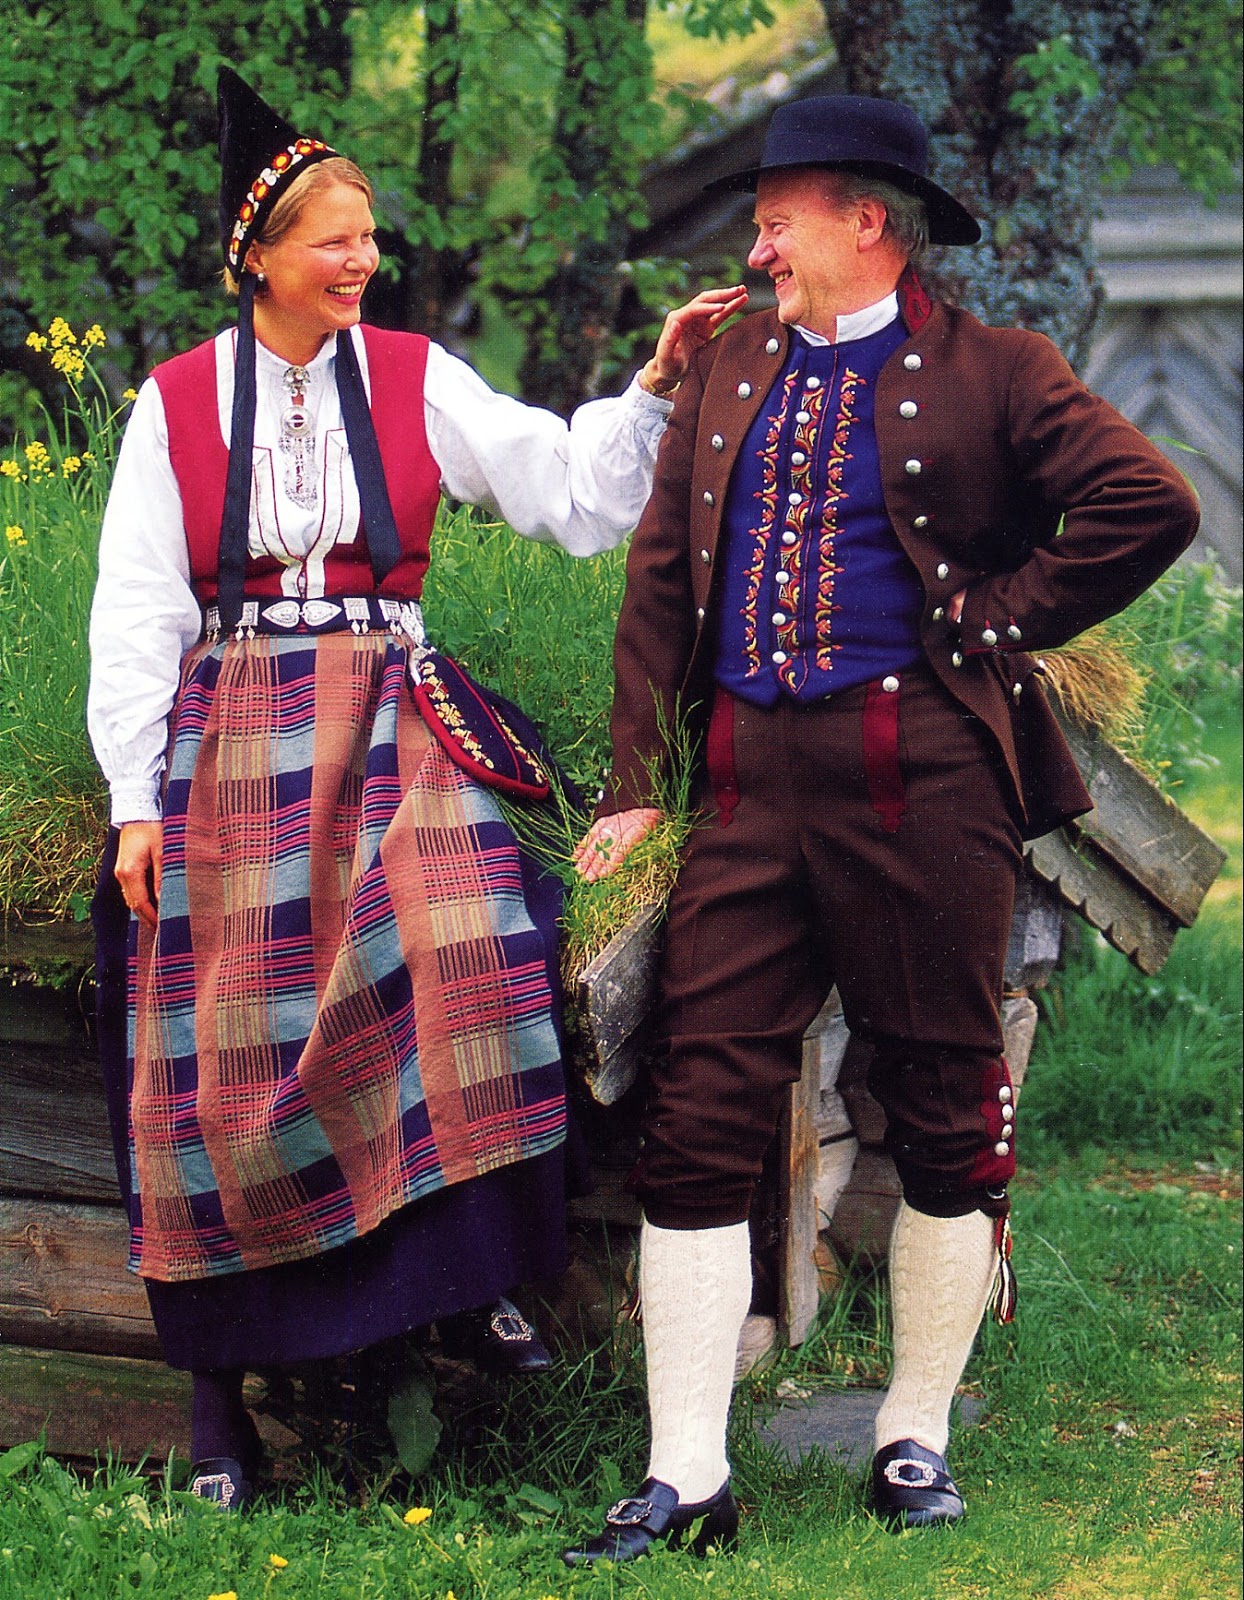 FolkCostume&Embroidery: Overview of Norwegian Costumes part 3A, the West